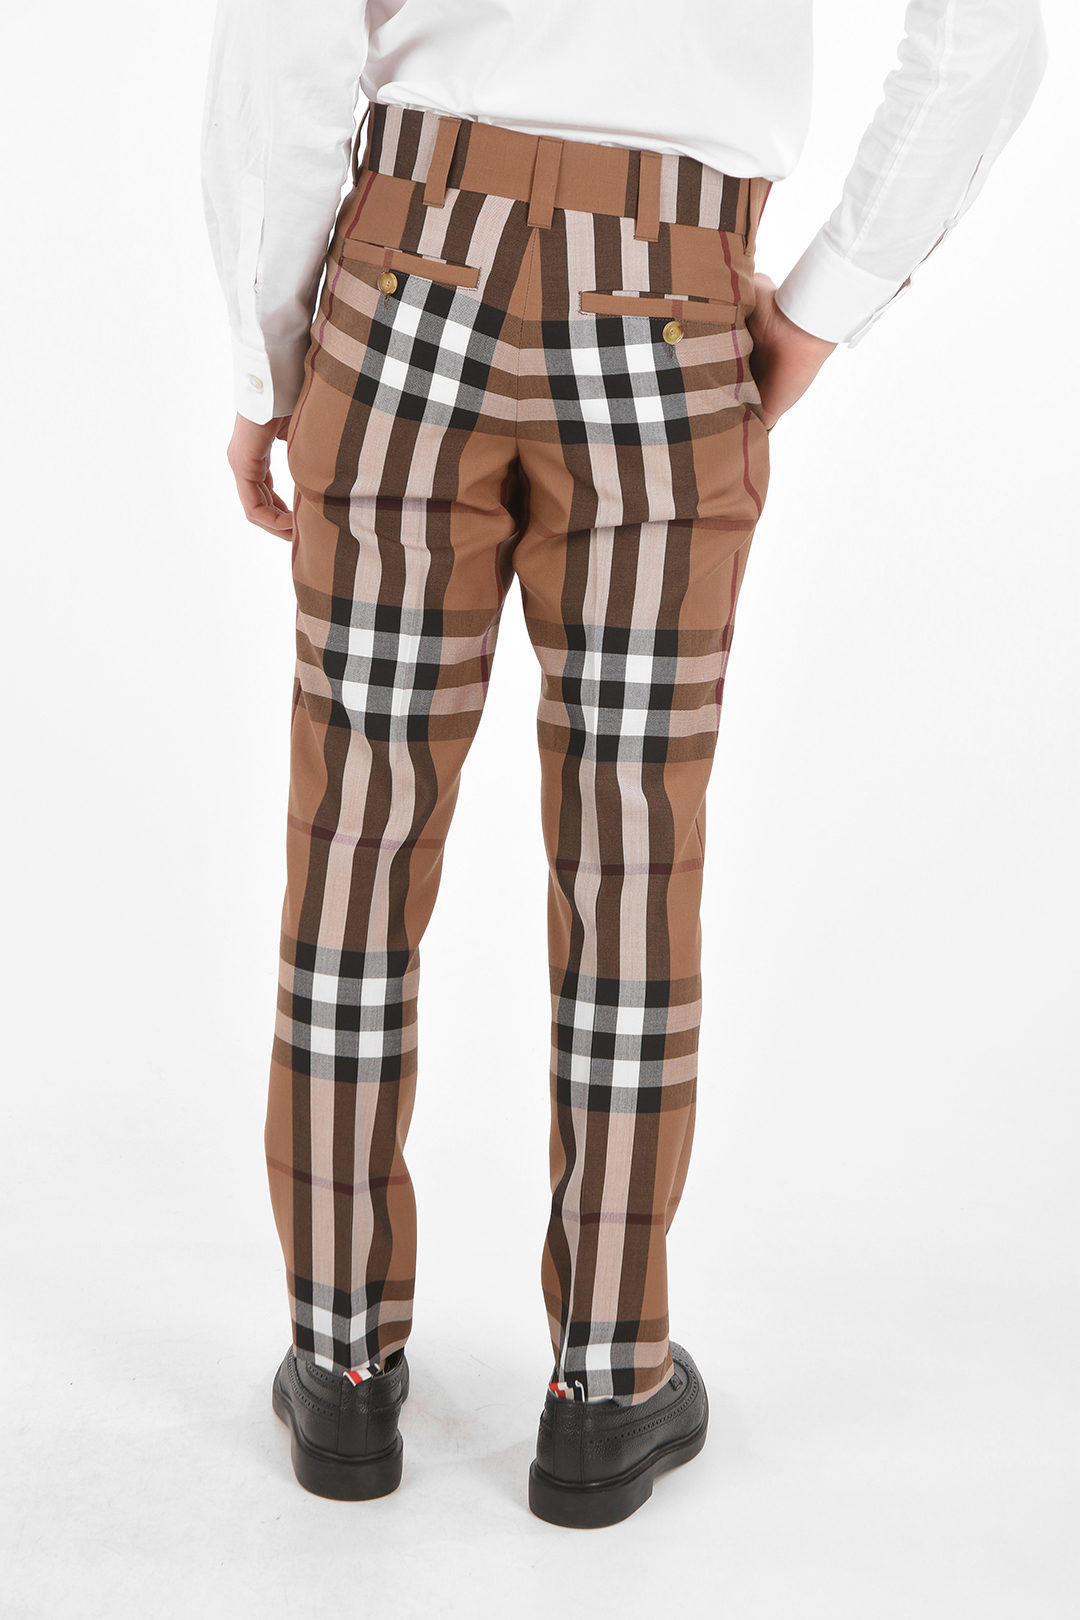 Outlet Burberry women Trousers - Glamood Outlet